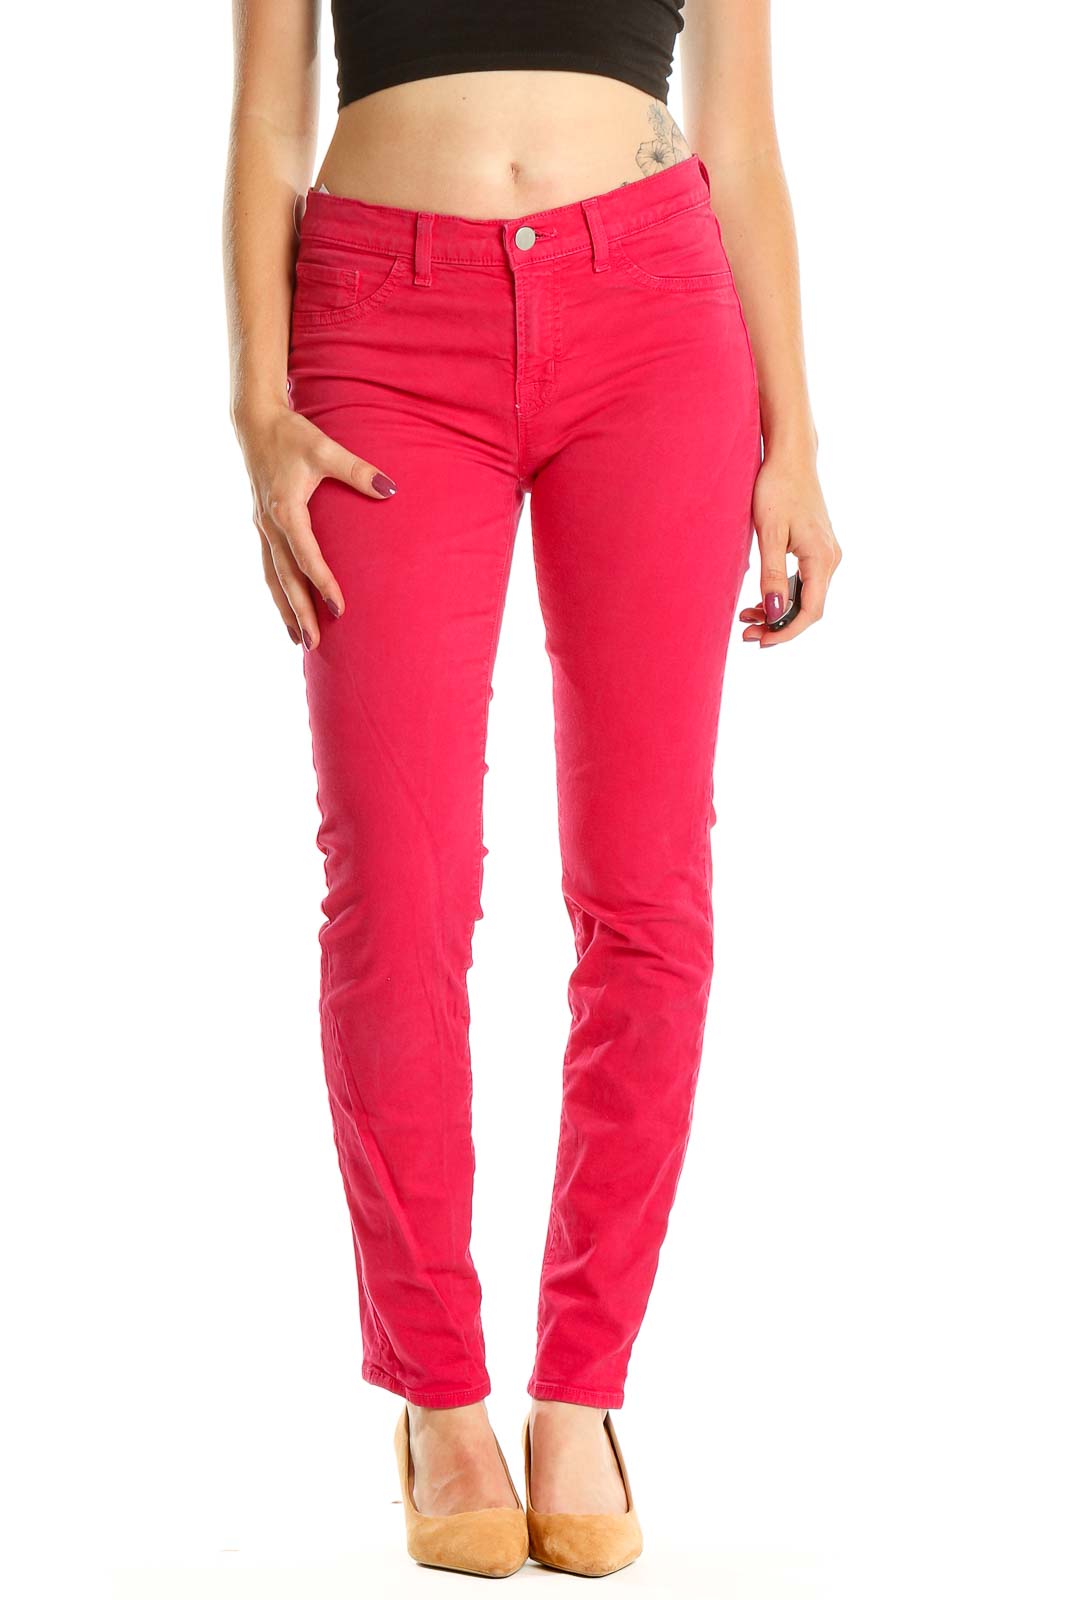 Pink Skinny Jeans Front